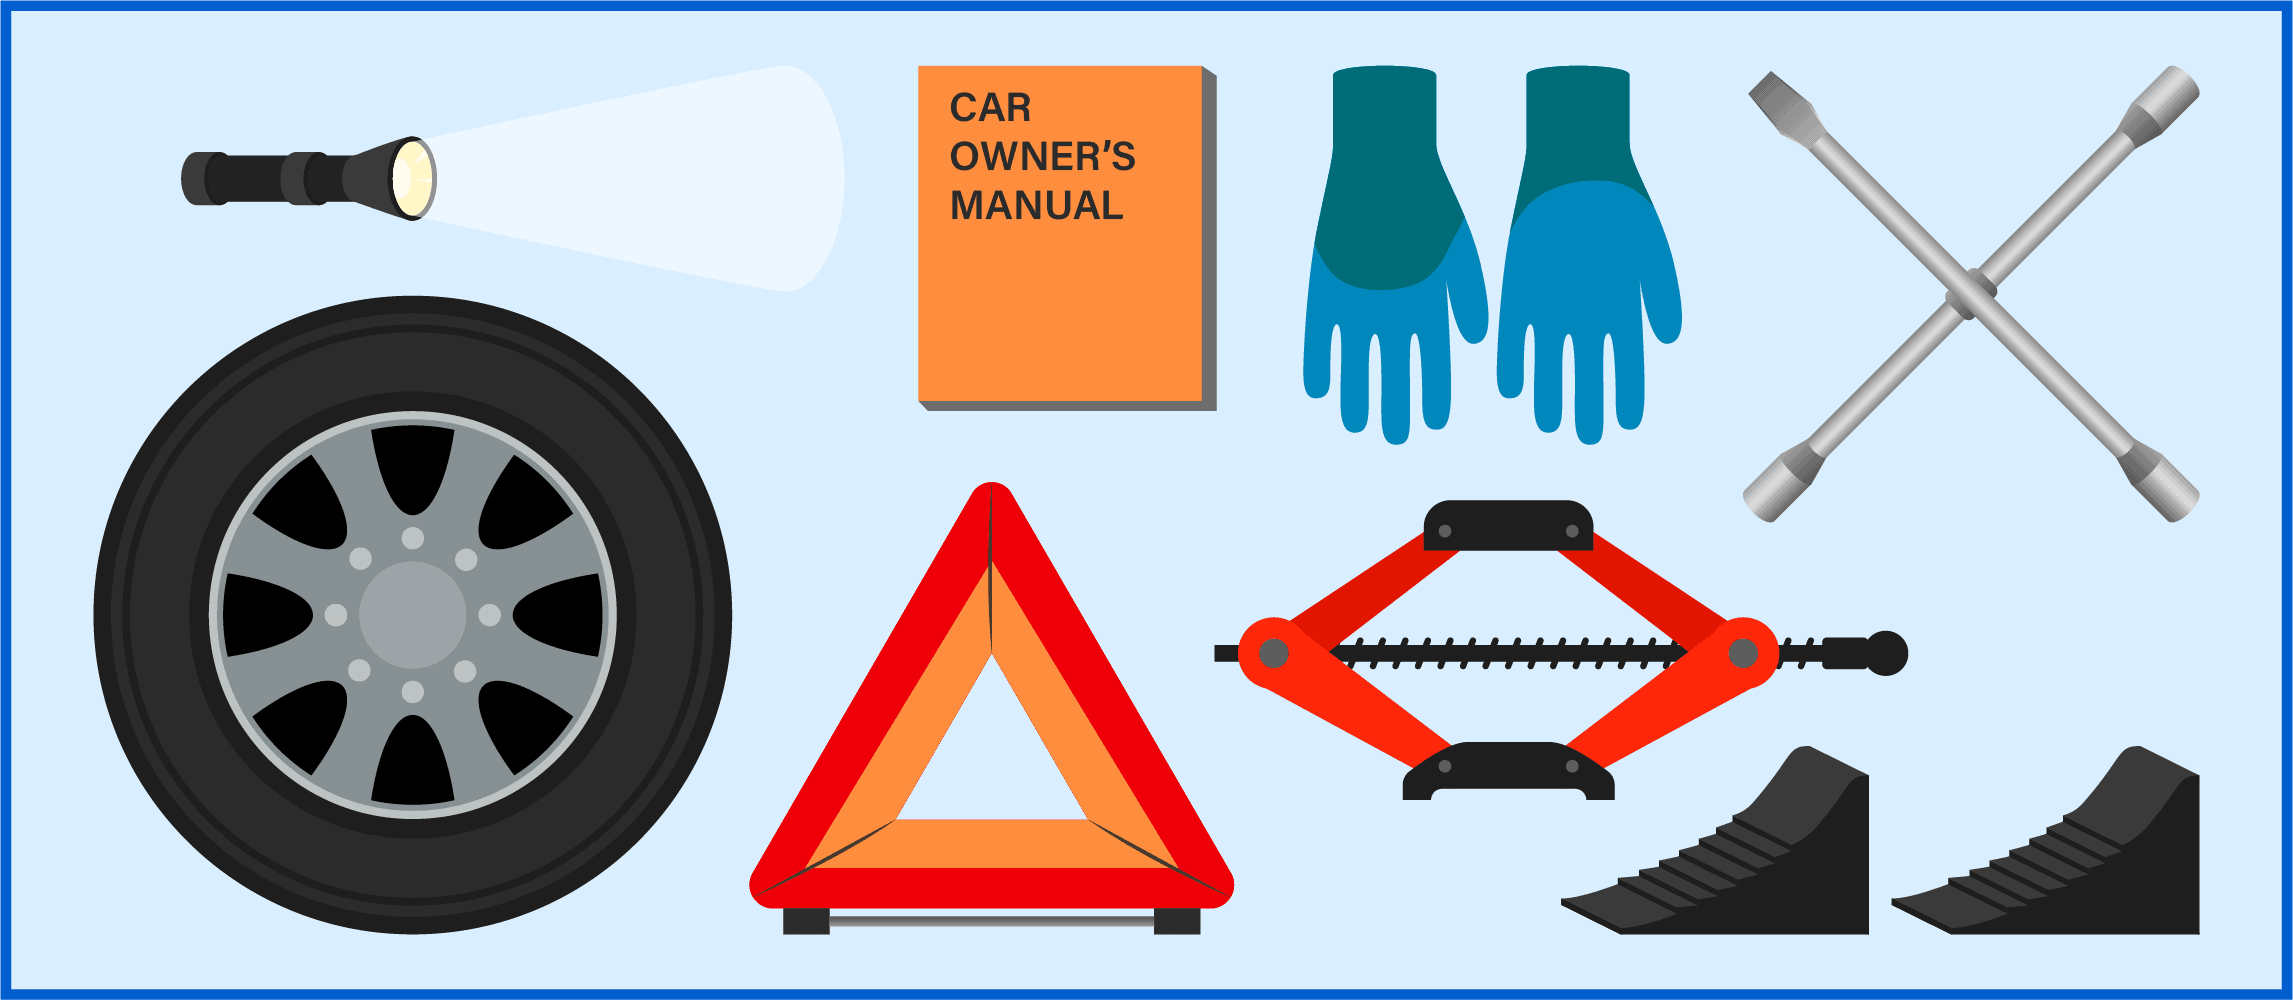 What You’ll Need to Change a Tire